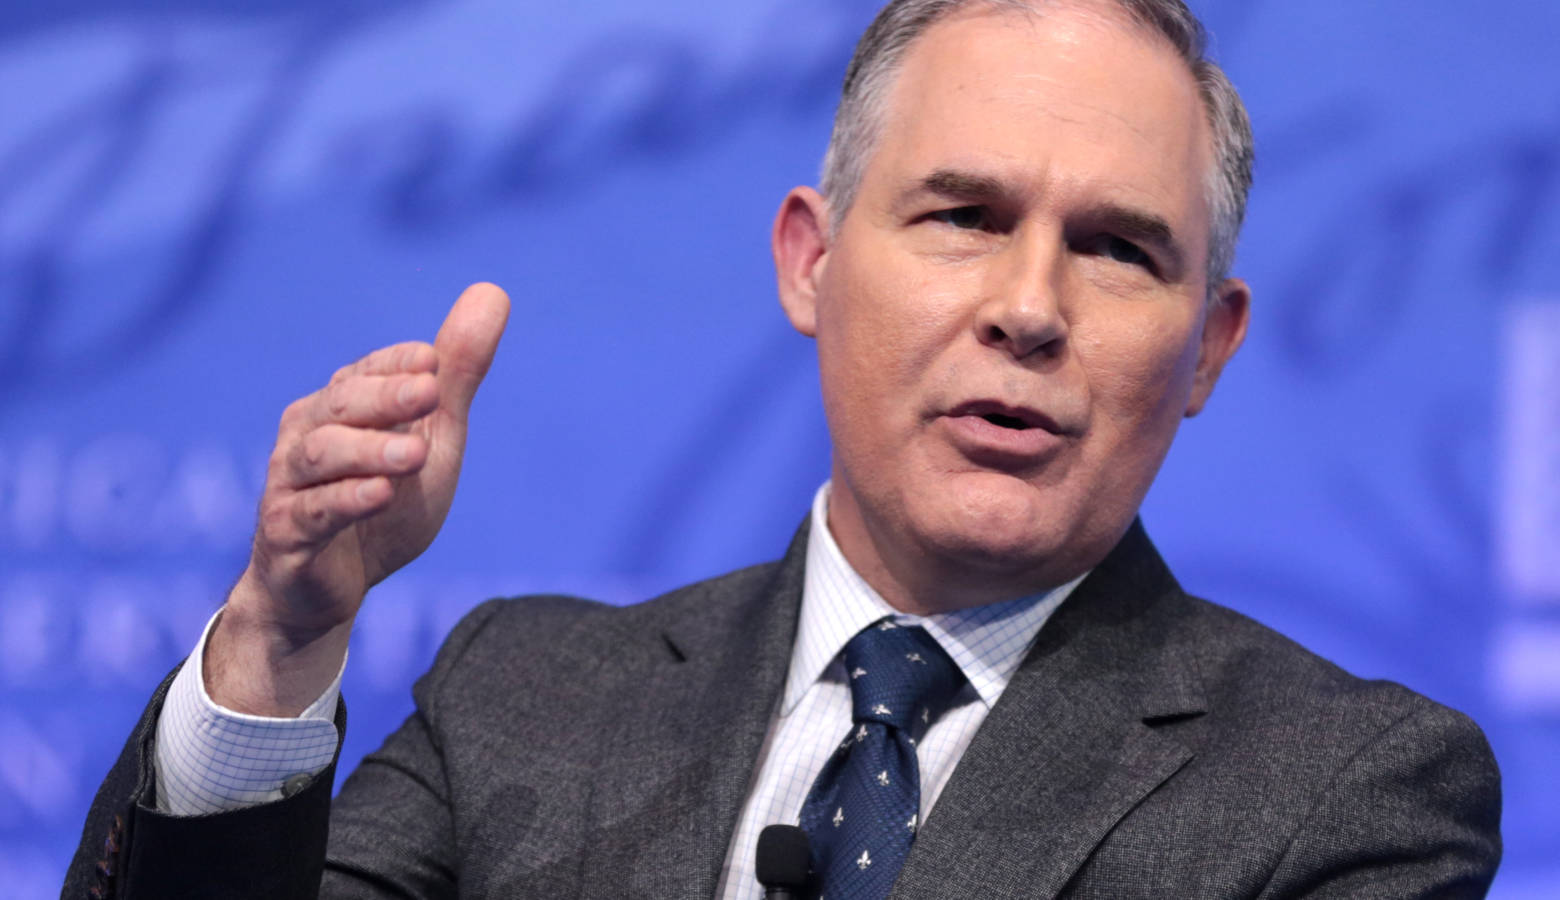 Scott Pruitt speaking at the 2017 Conservative Political Action Conference in Maryland during his time as EPA administrator (Gage Skidmore/Wikimedia Commons)